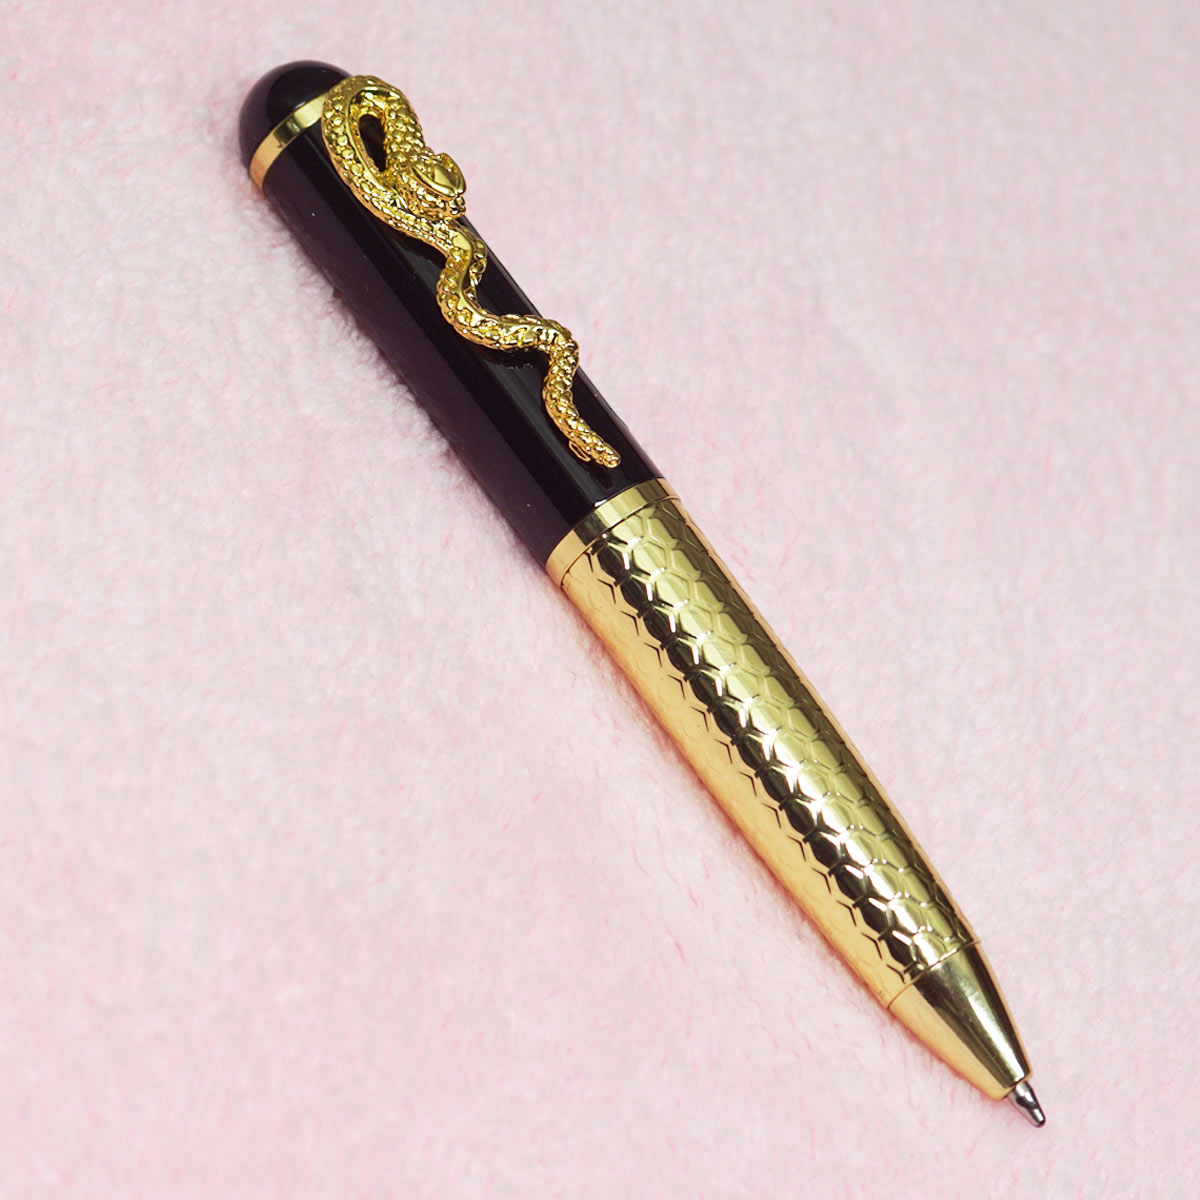 penhouse.in 5014 Mini Golden Color Body With Black Color Cap And Snake Clip Medium Tip Twist Type Ball Pen SKU 23338